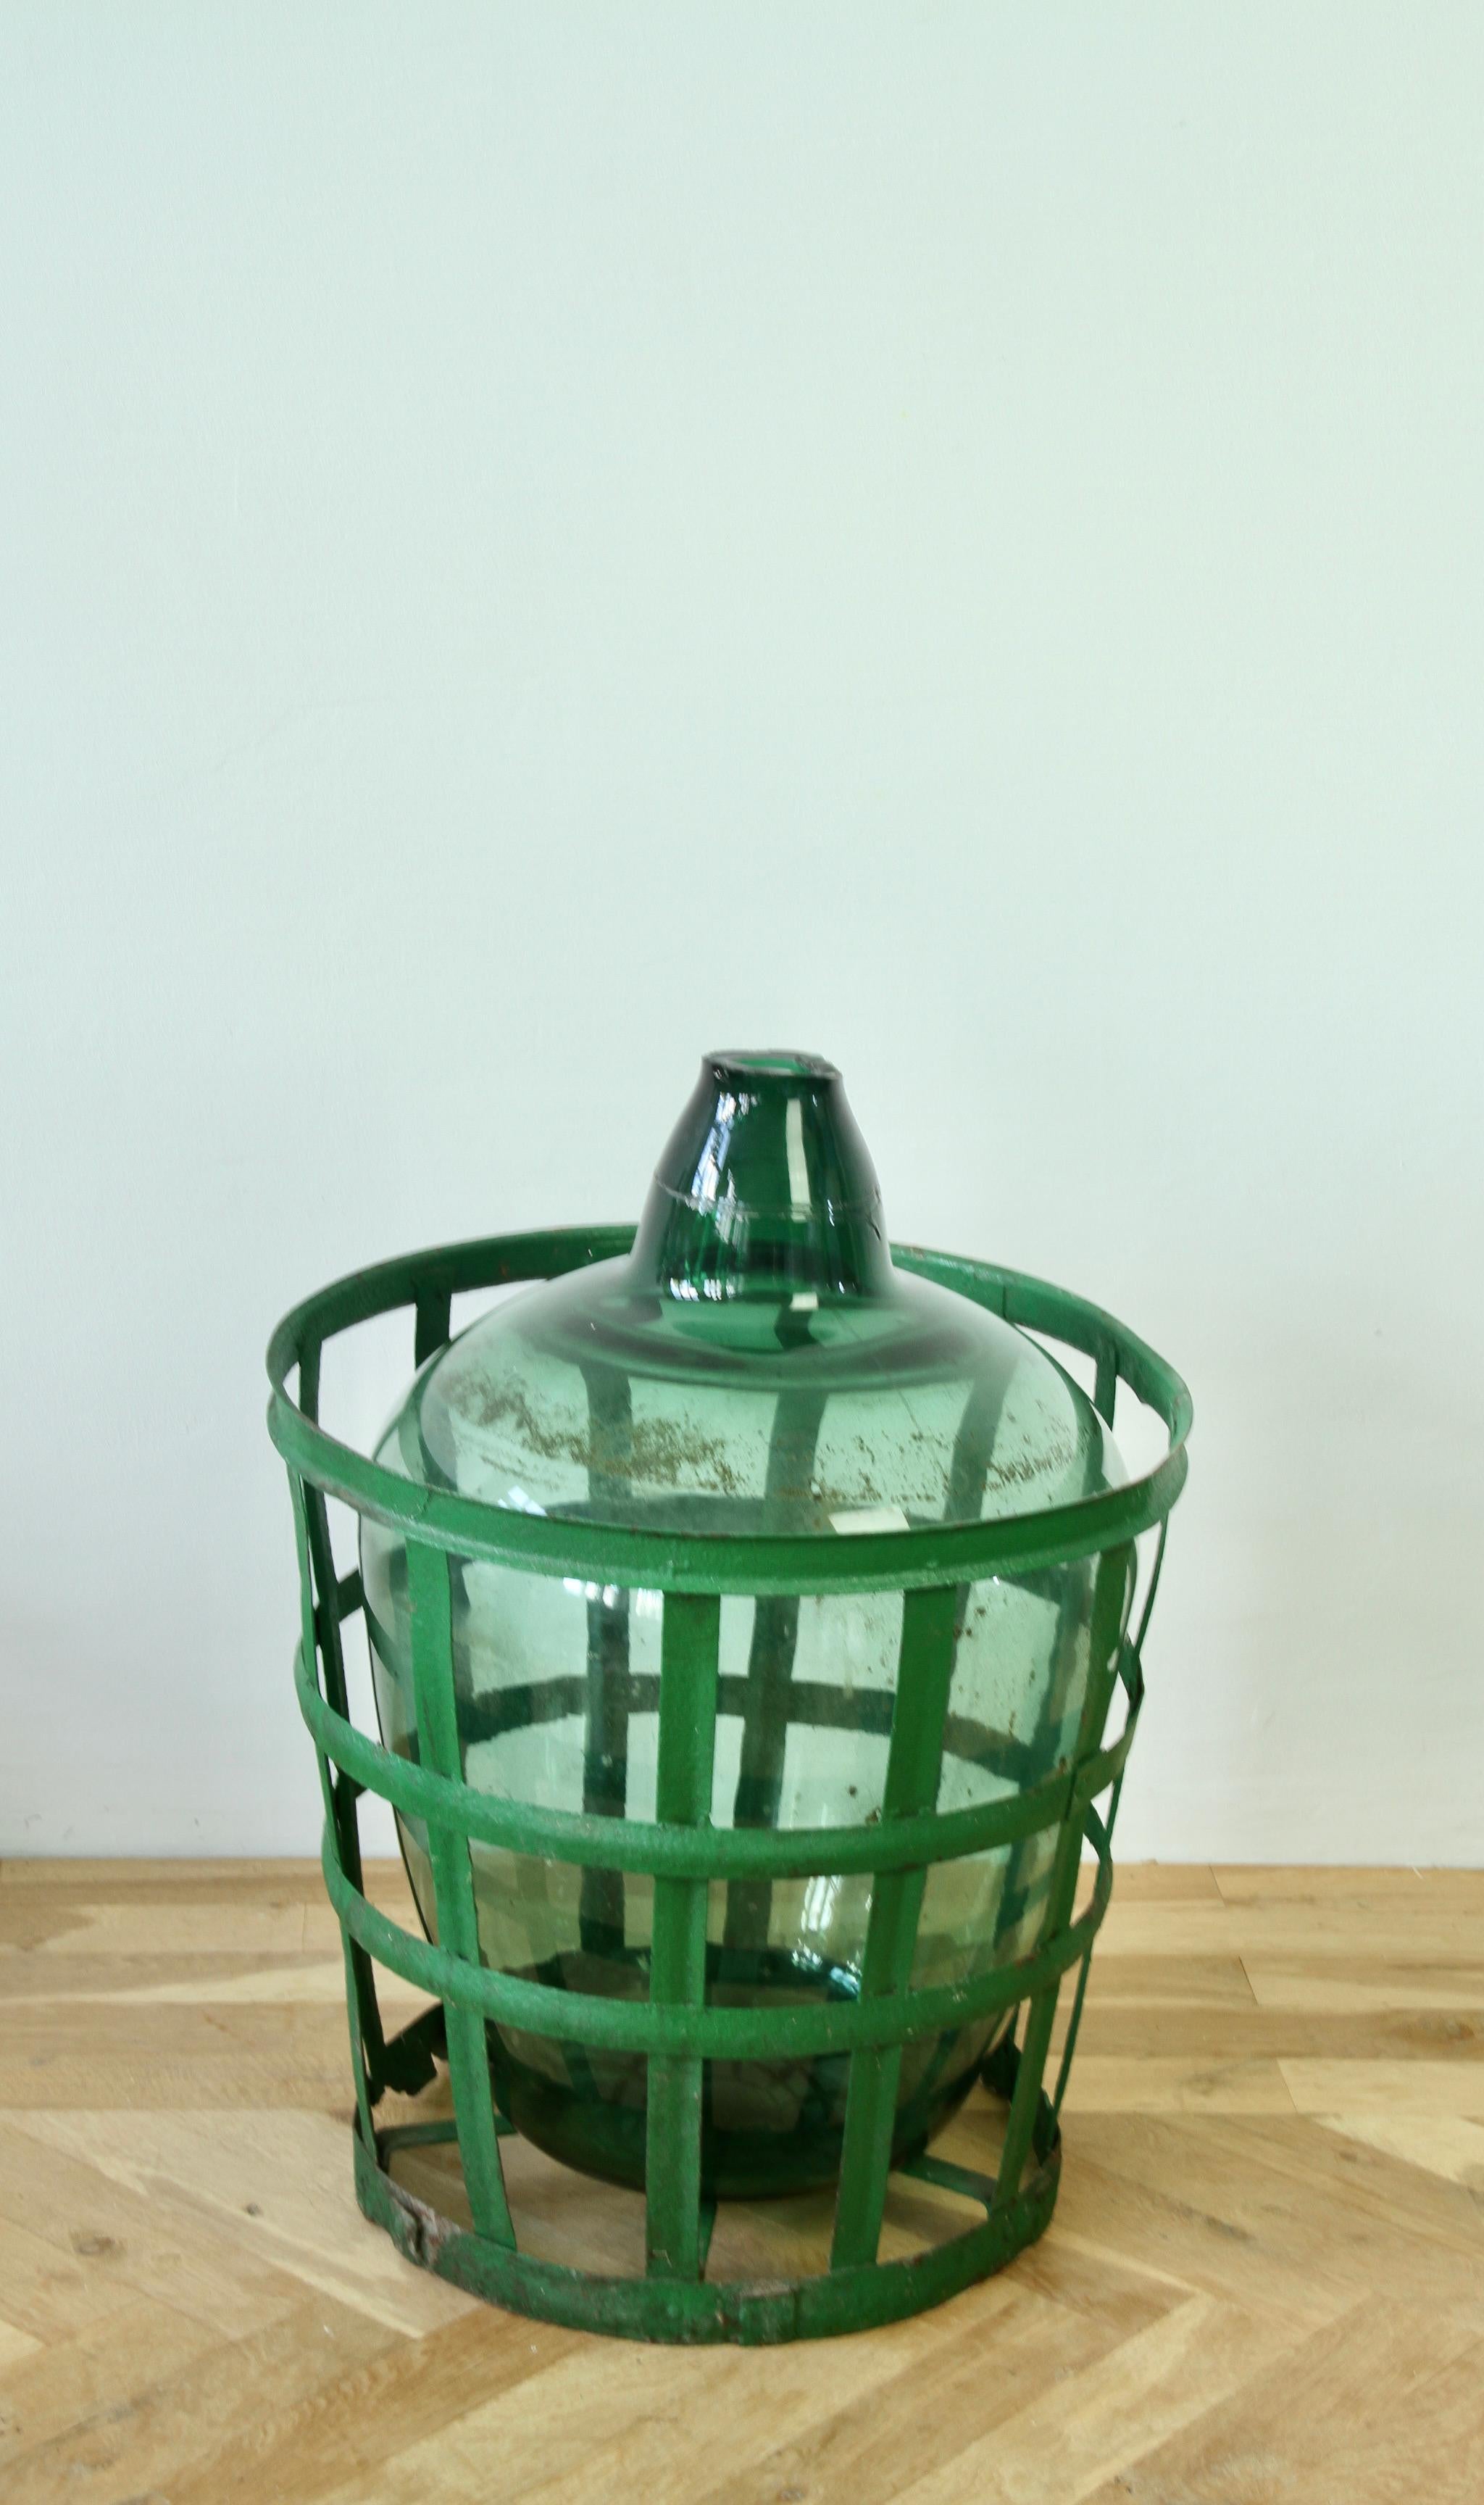 Industrial Large Green Glass Hungarian Demijohn, Amphora or Vase with Original Iron Basket For Sale